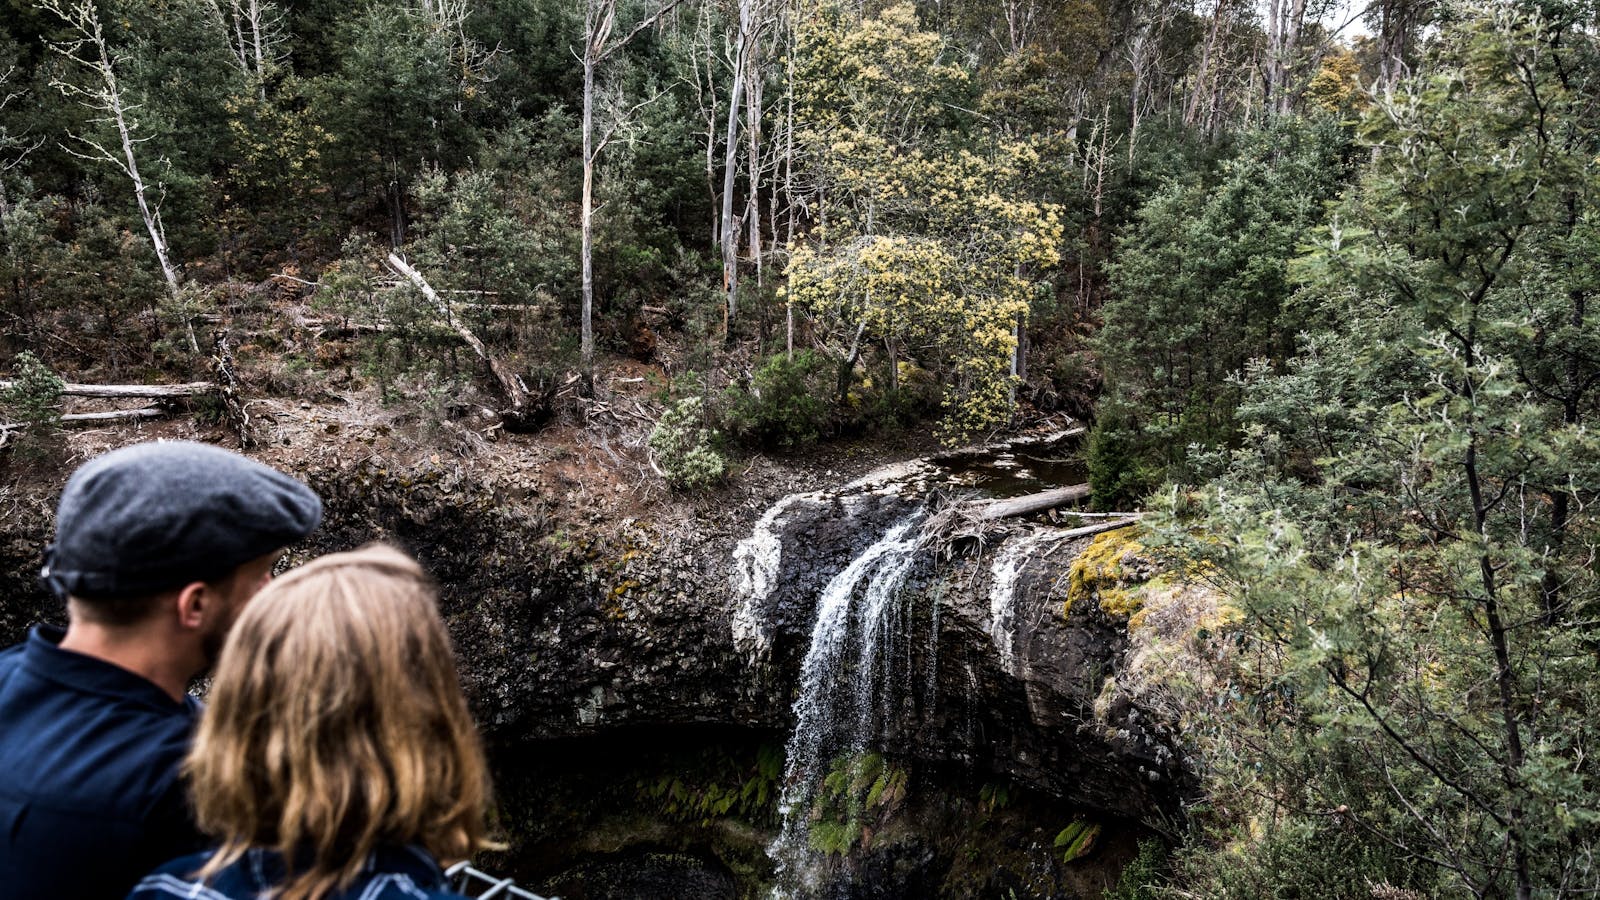 Tarraleah Estate has a number of bush walks including one that leads to their own waterfall.